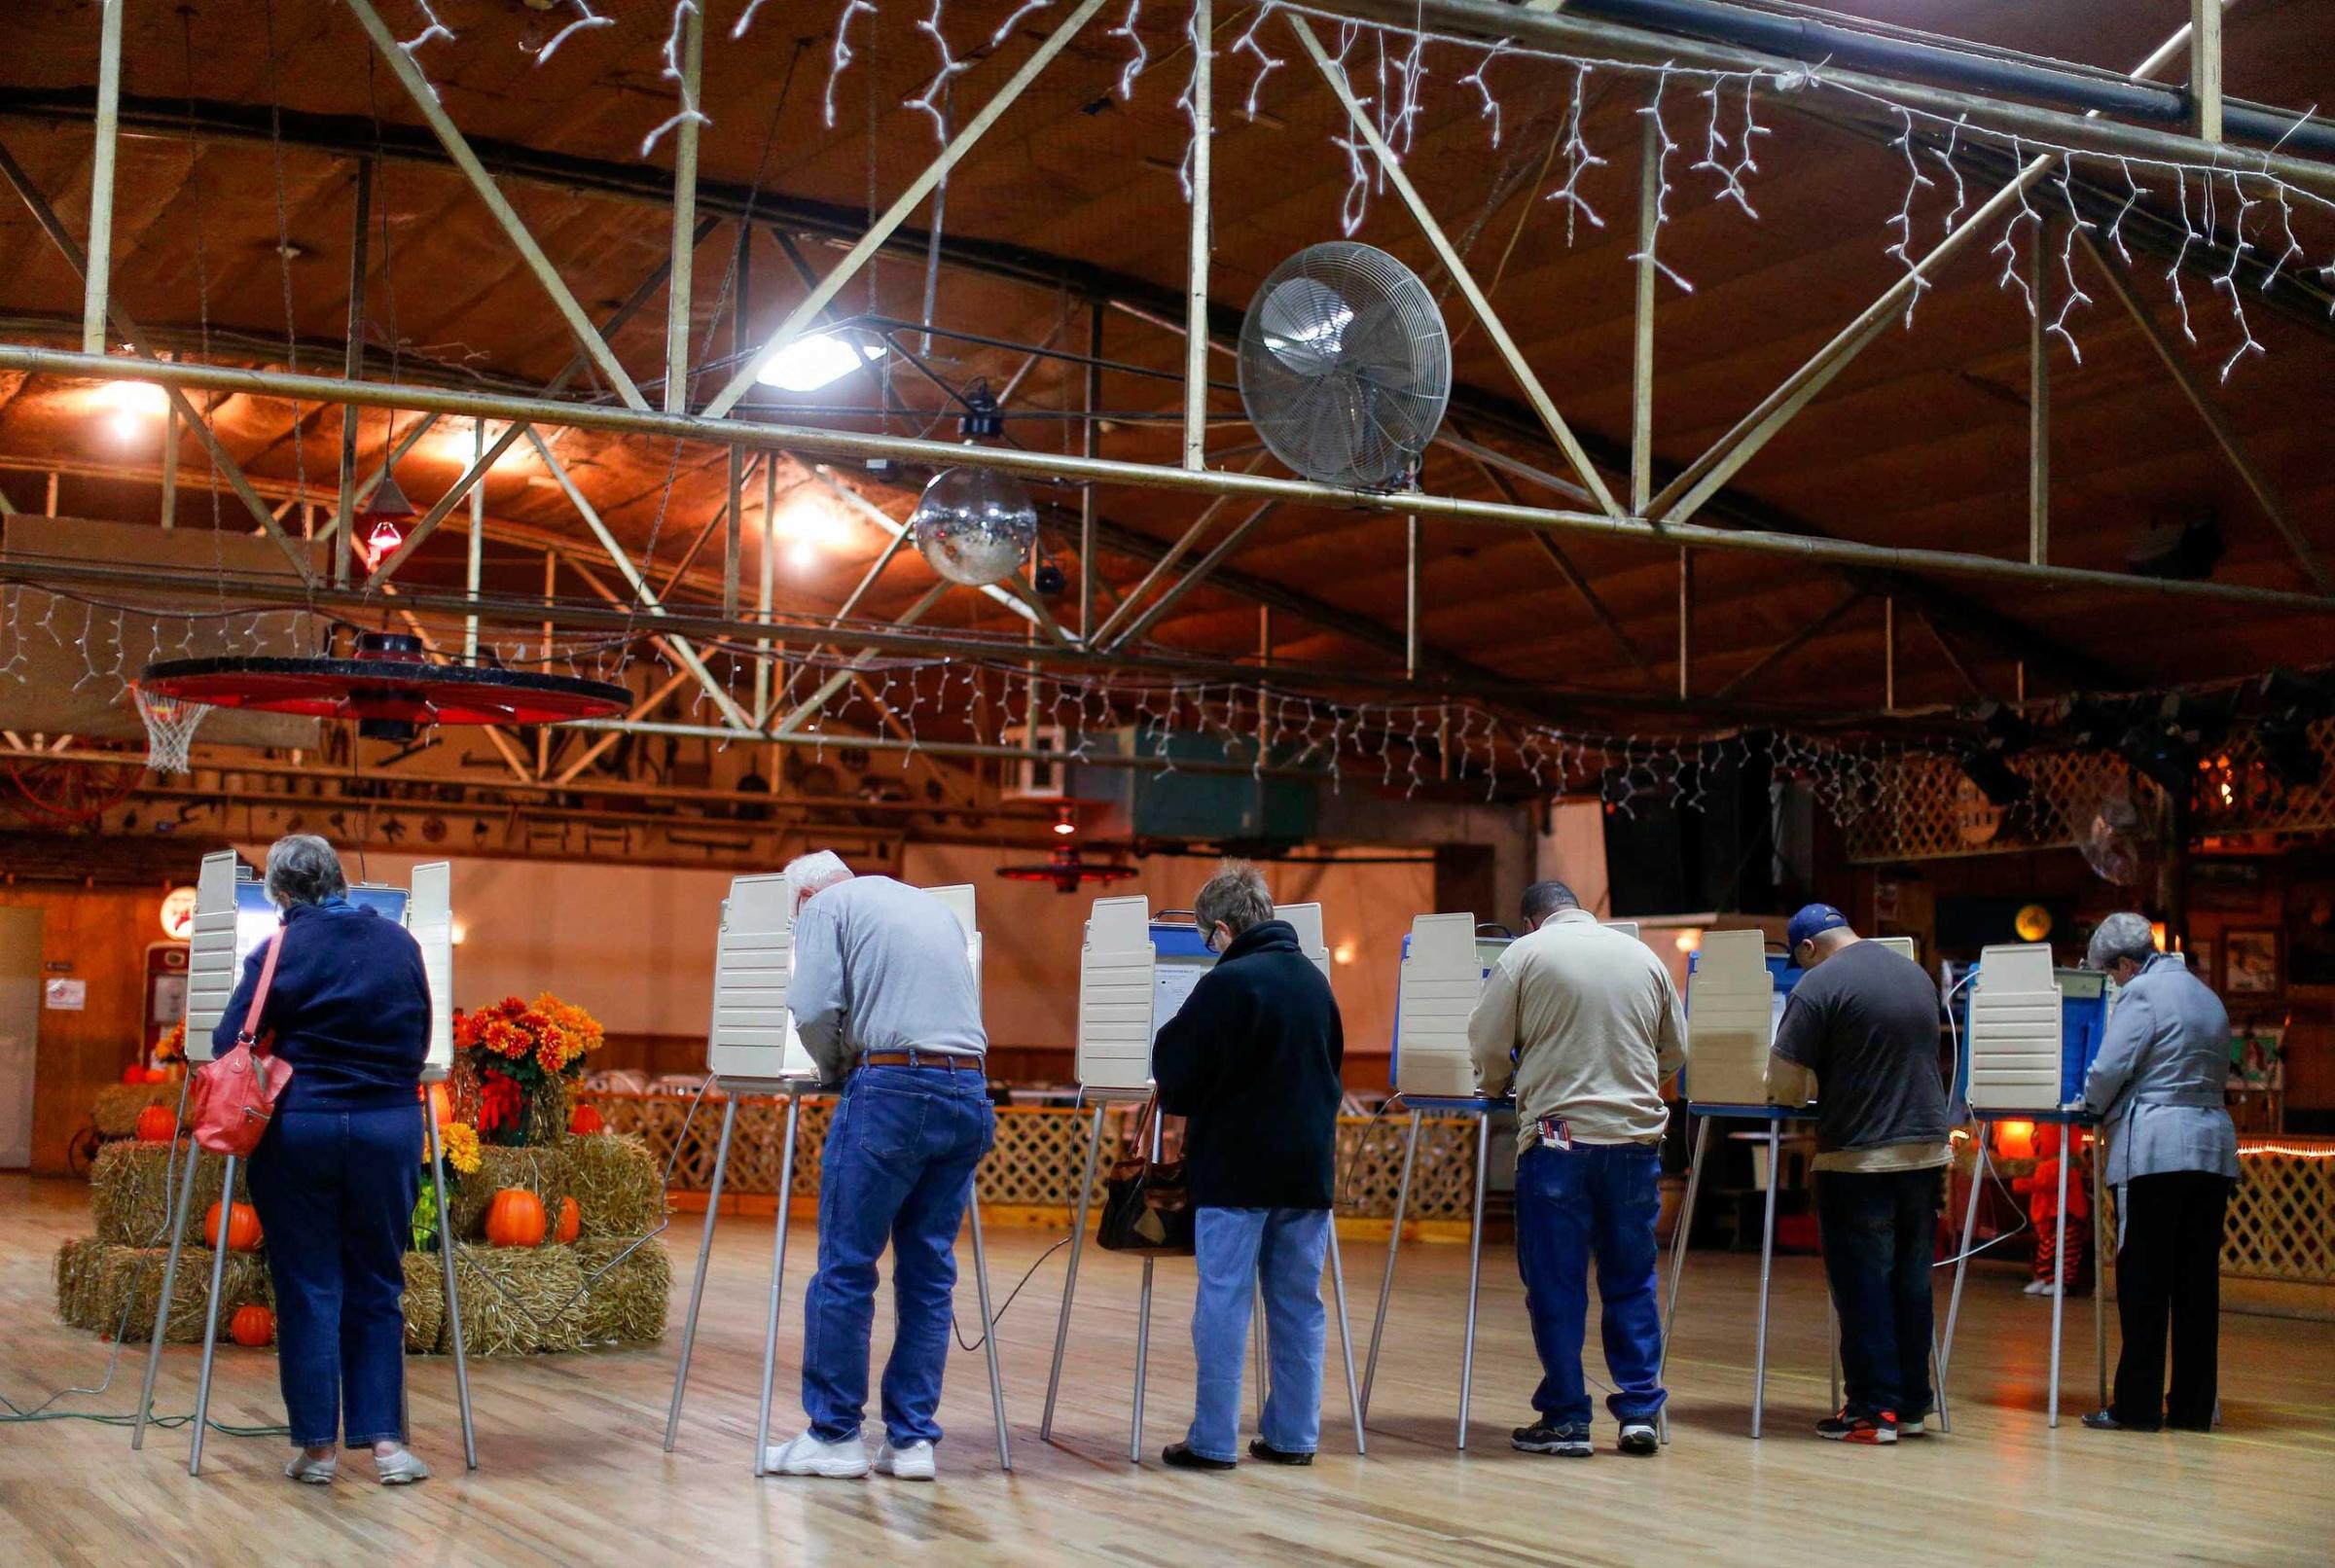 Voters fill in their ballots at a polling place located in Shoaf's Wagon Wheel during the U.S. midterm elections in Salisbury